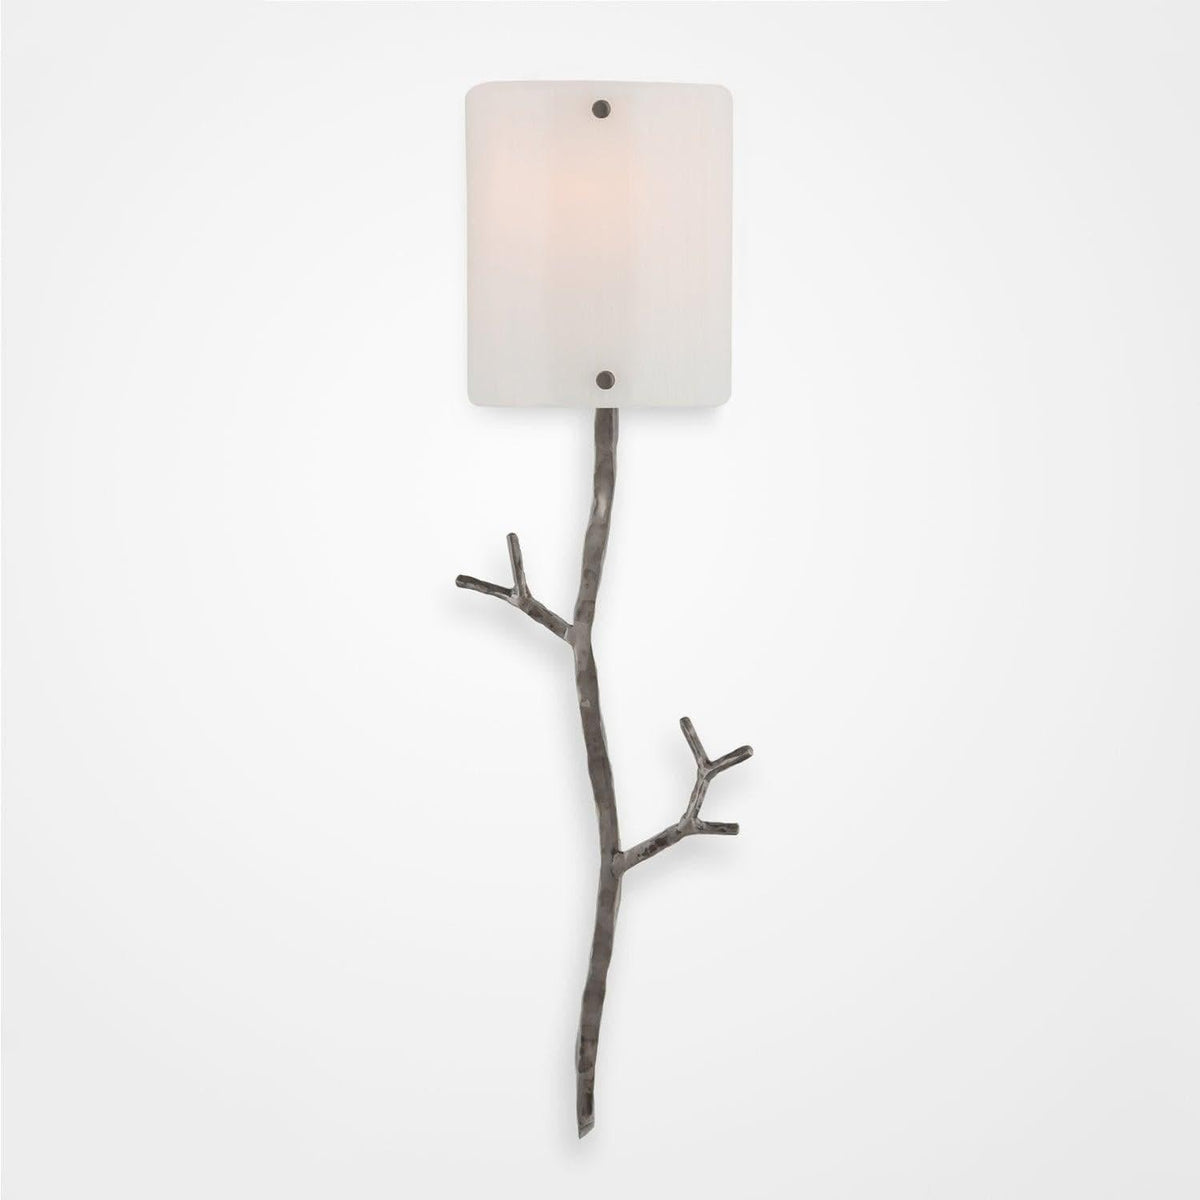 Hammerton Studio - Ironwood Twig Cover Sconce - CSB0032-0A-SN-IW-E2 | Montreal Lighting & Hardware